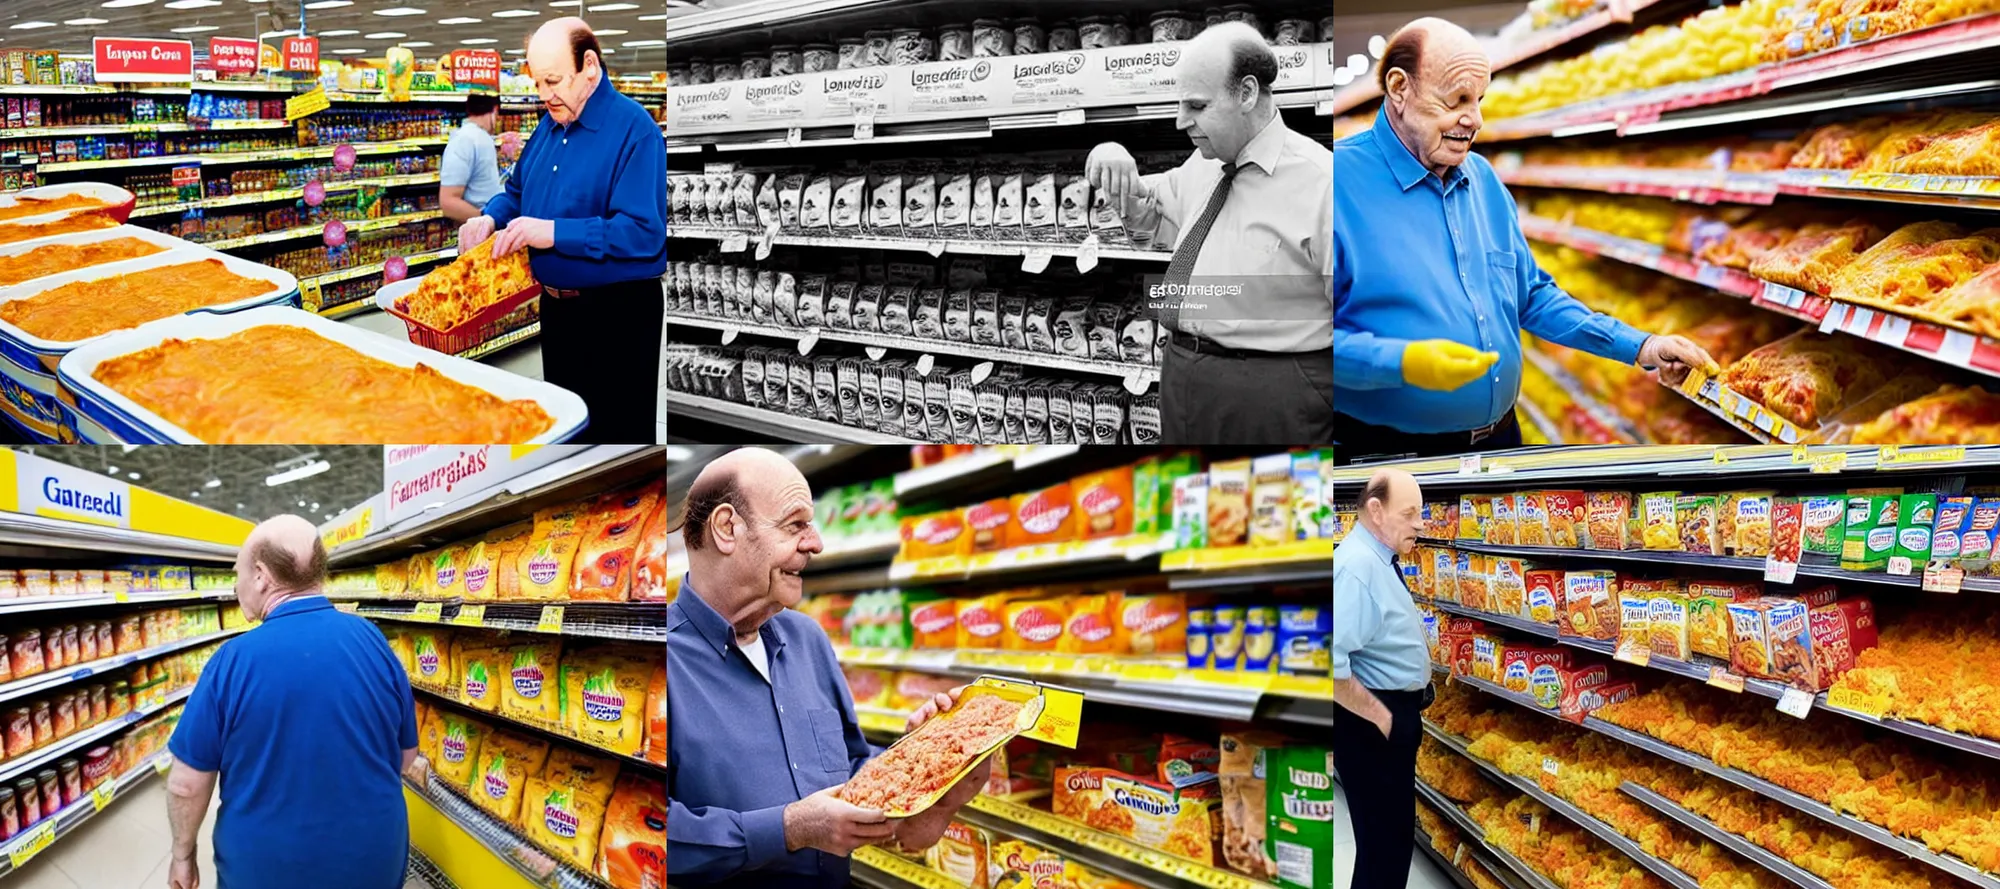 Prompt: garfield shopping for lasagna at the supermarket, retired, late 5 0 s, balding